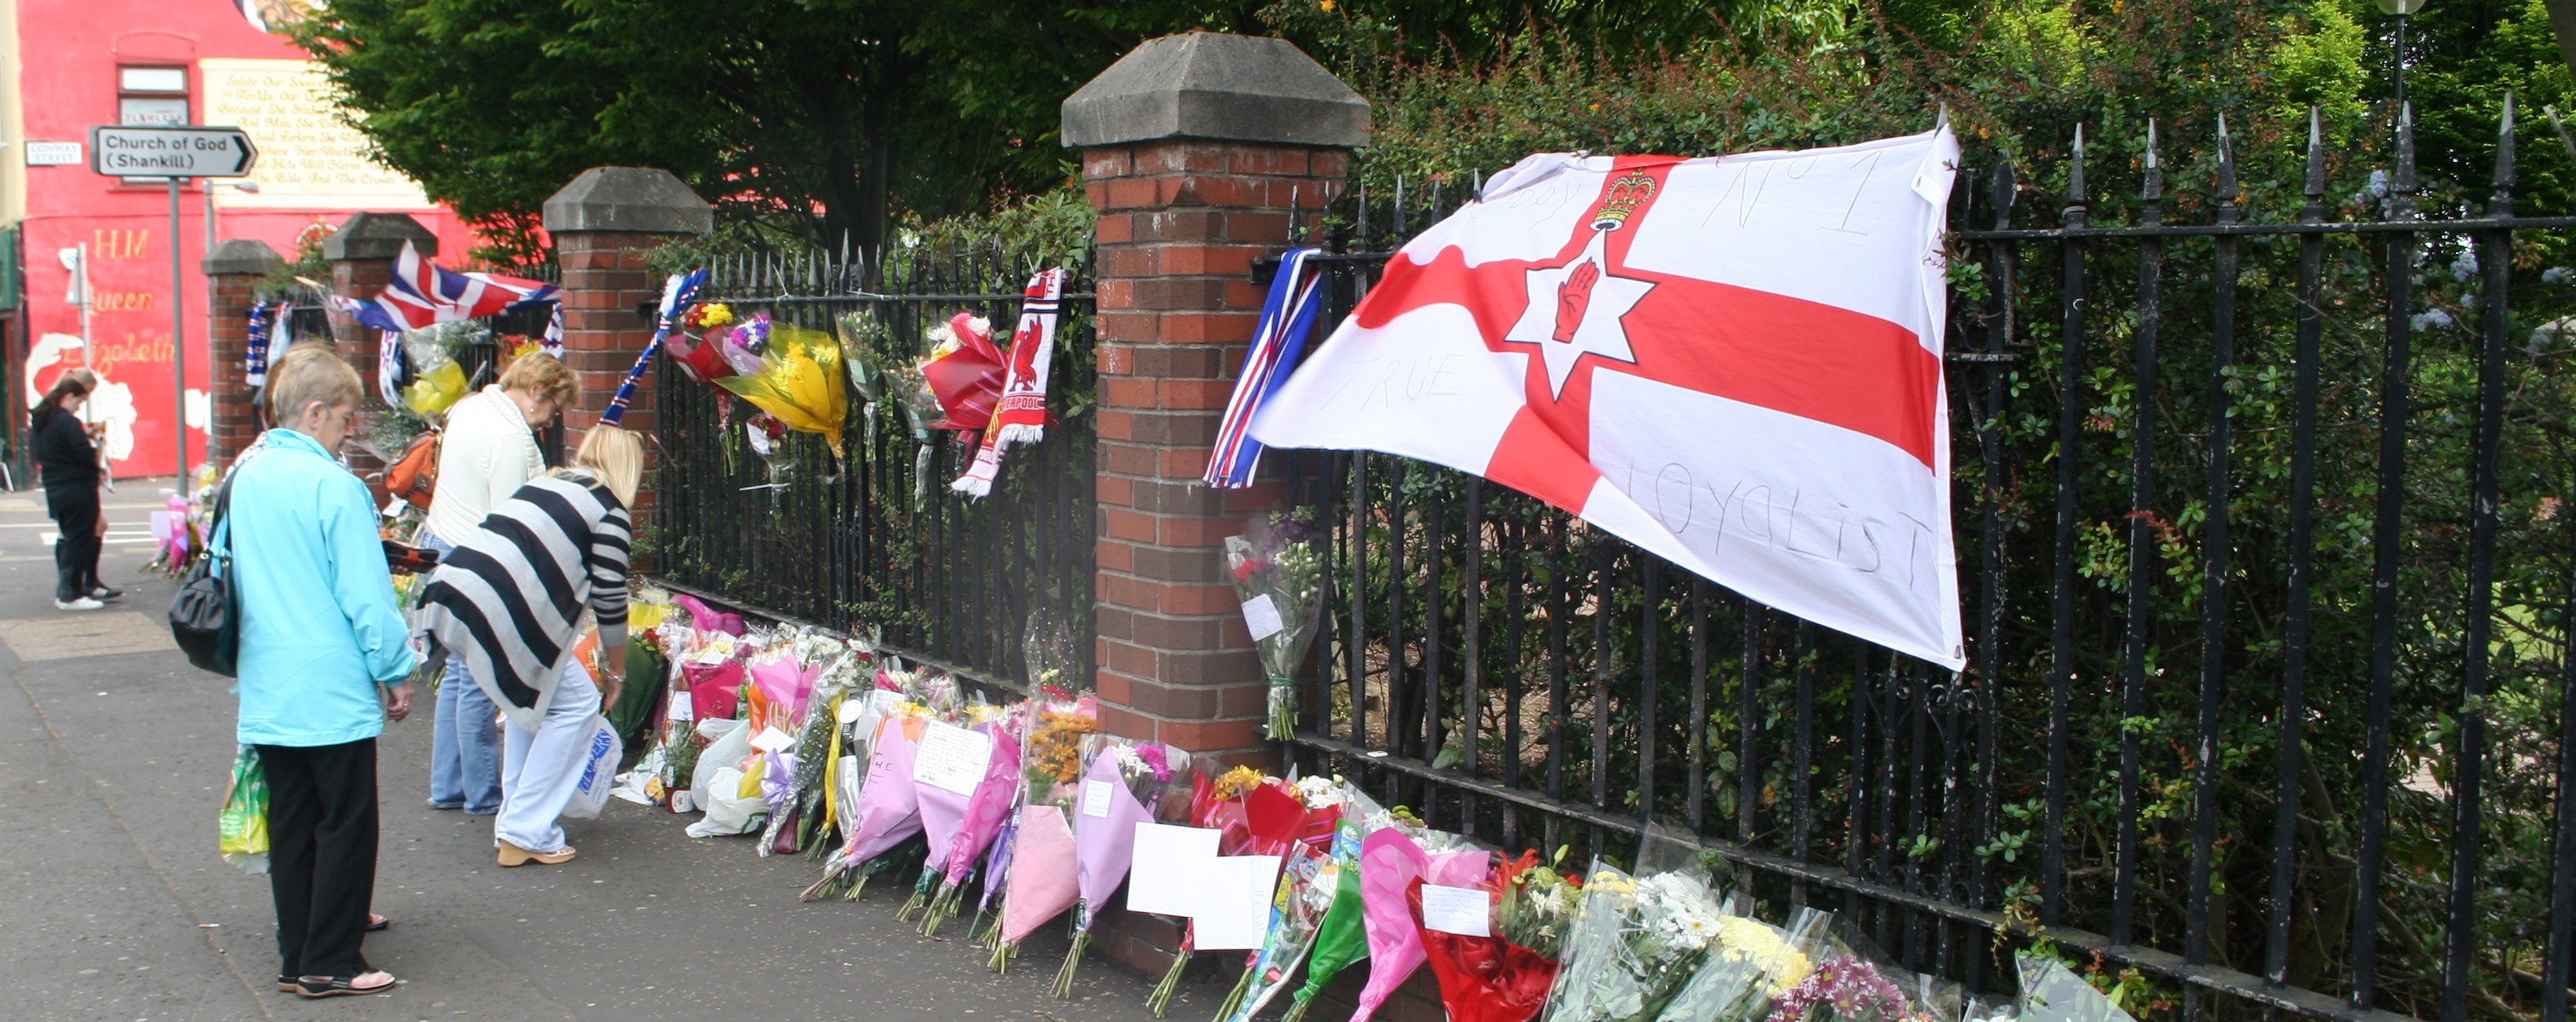 flags and flowers are tied to the fence at an rememnce site